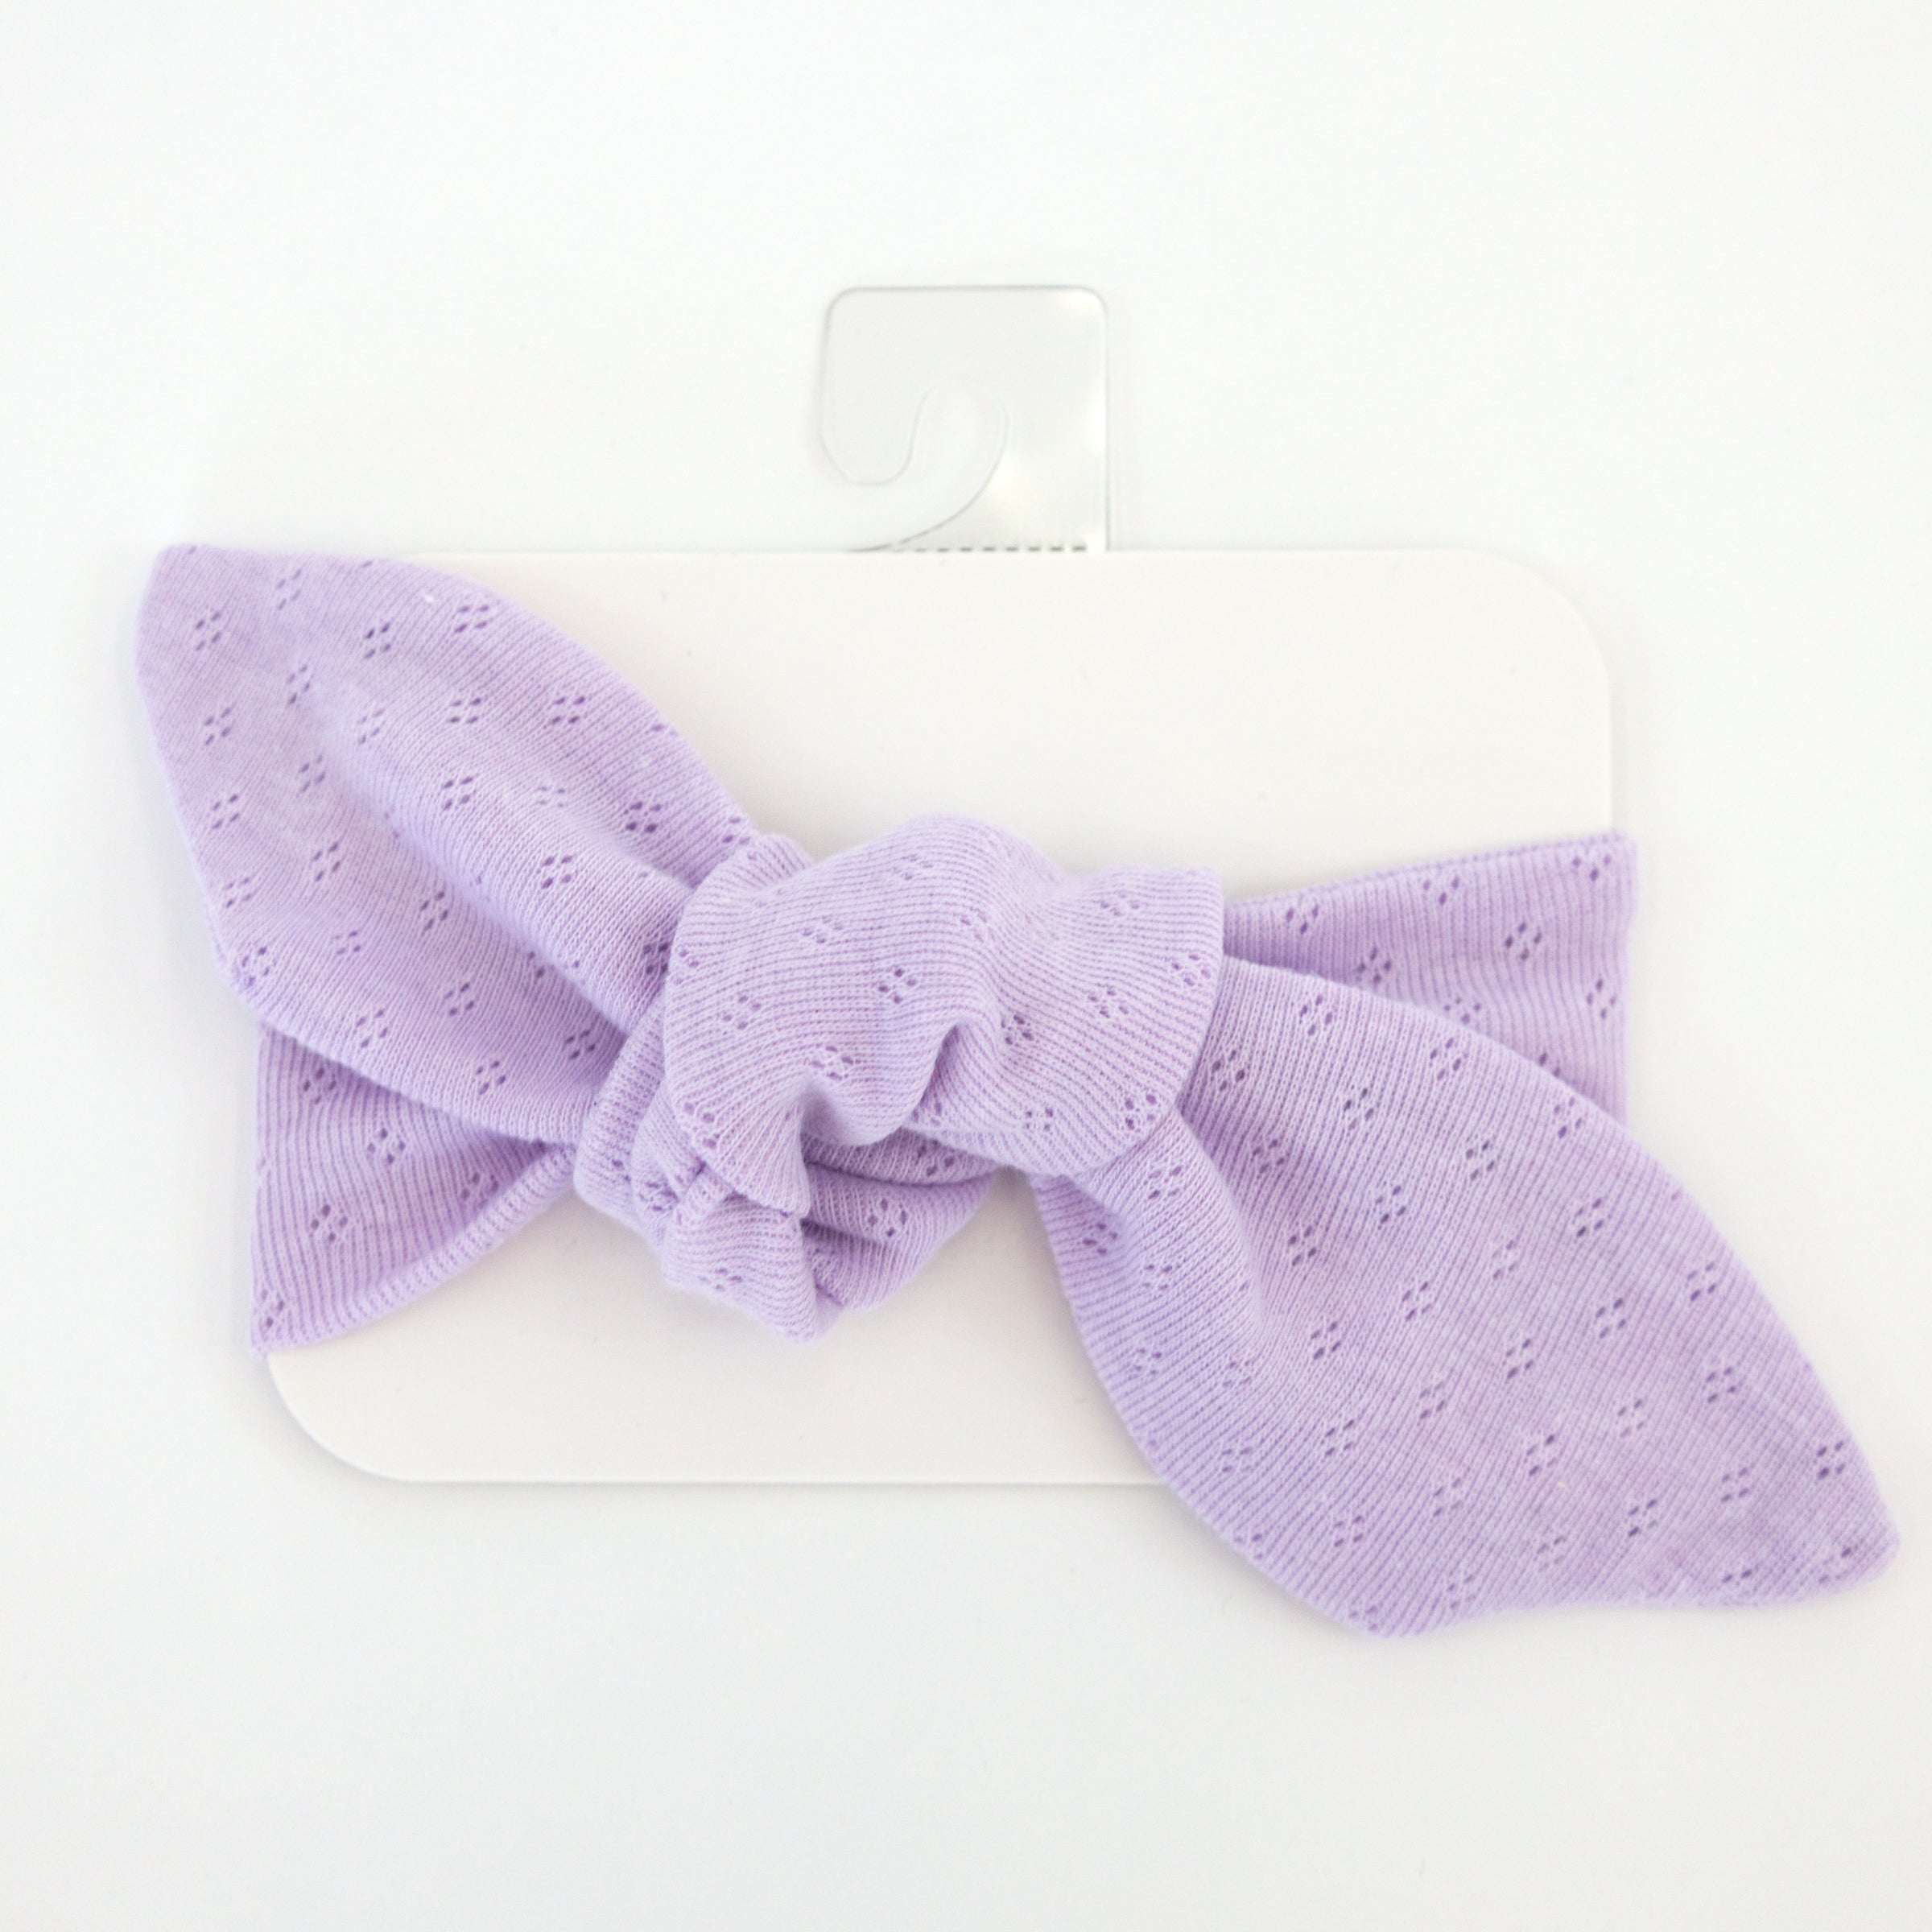 OH BABY POINTELLE ZIPPER FOOTIE AND HEADBAND SET - LILAC